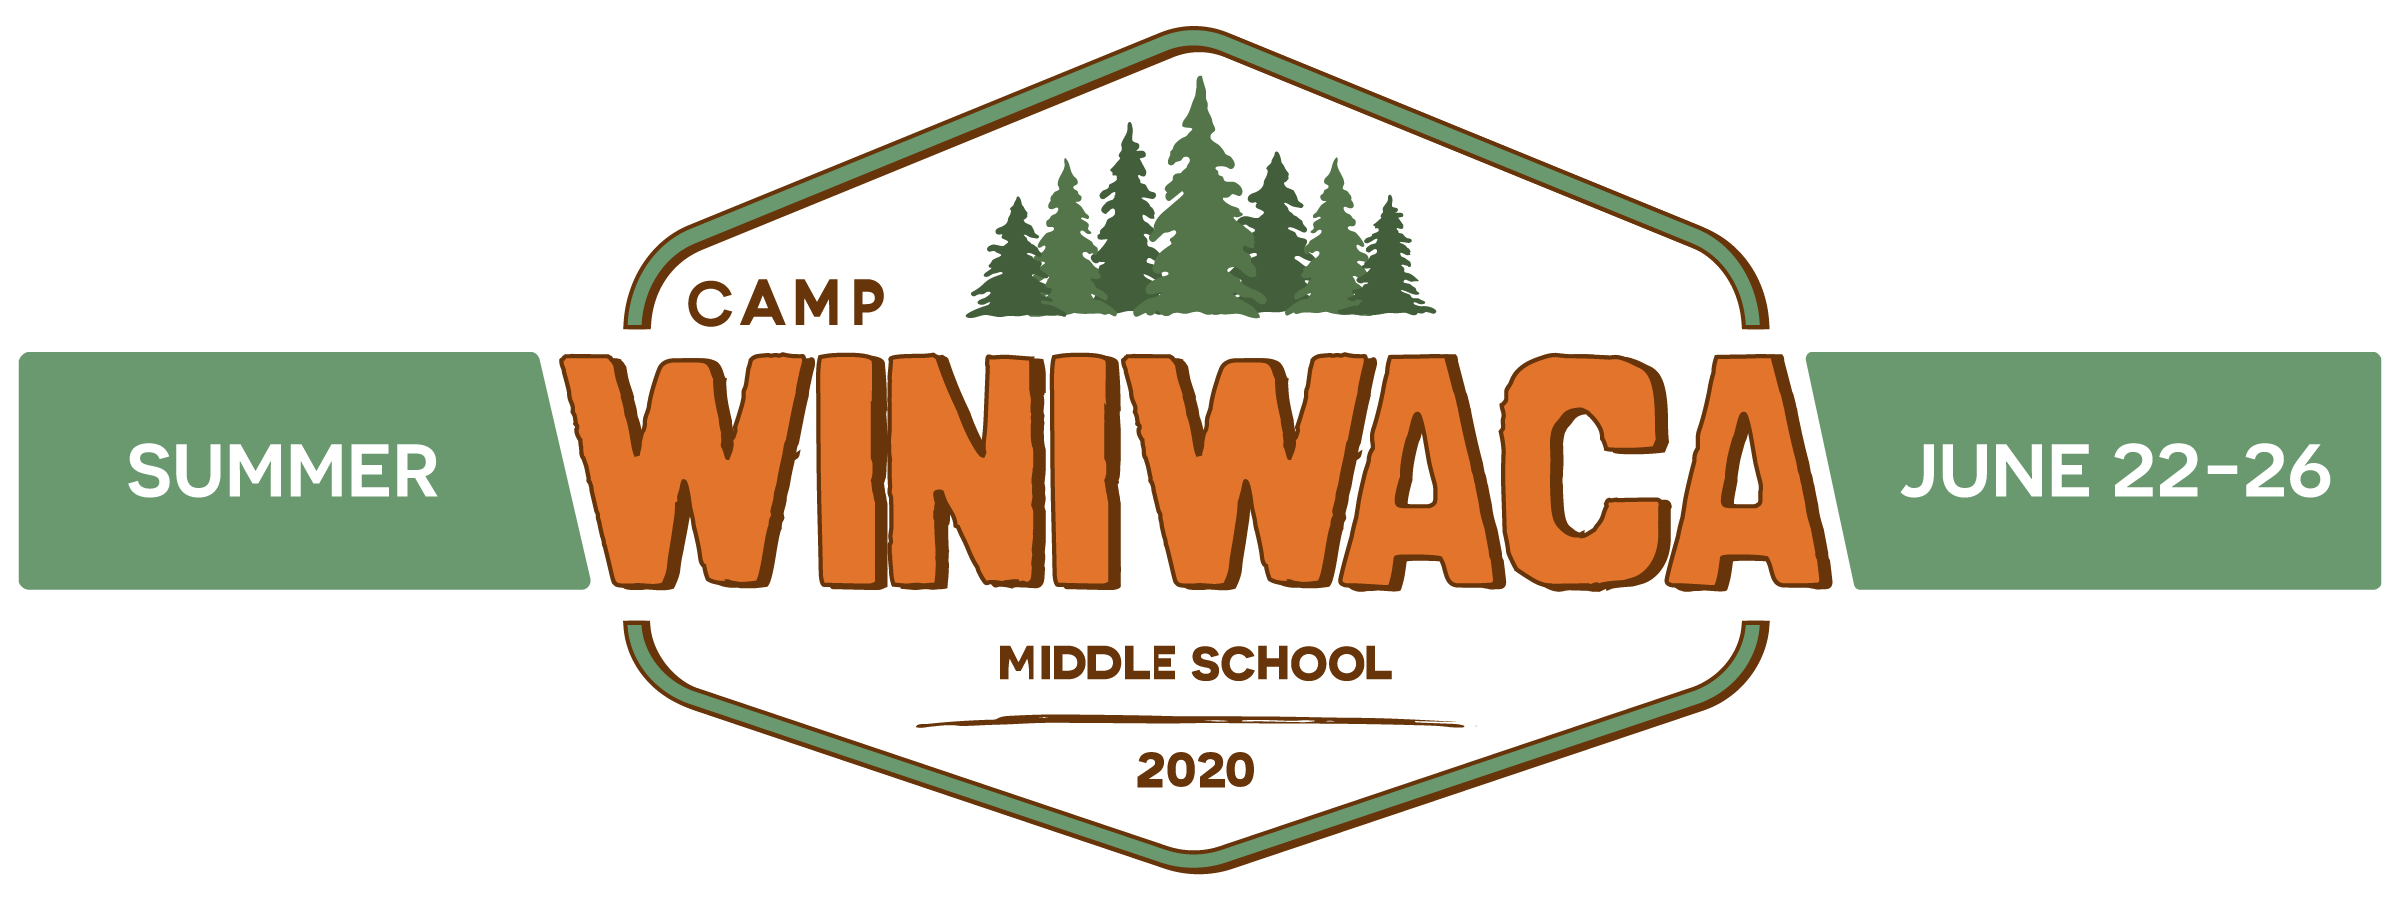 Camp_Web title Page-01.png